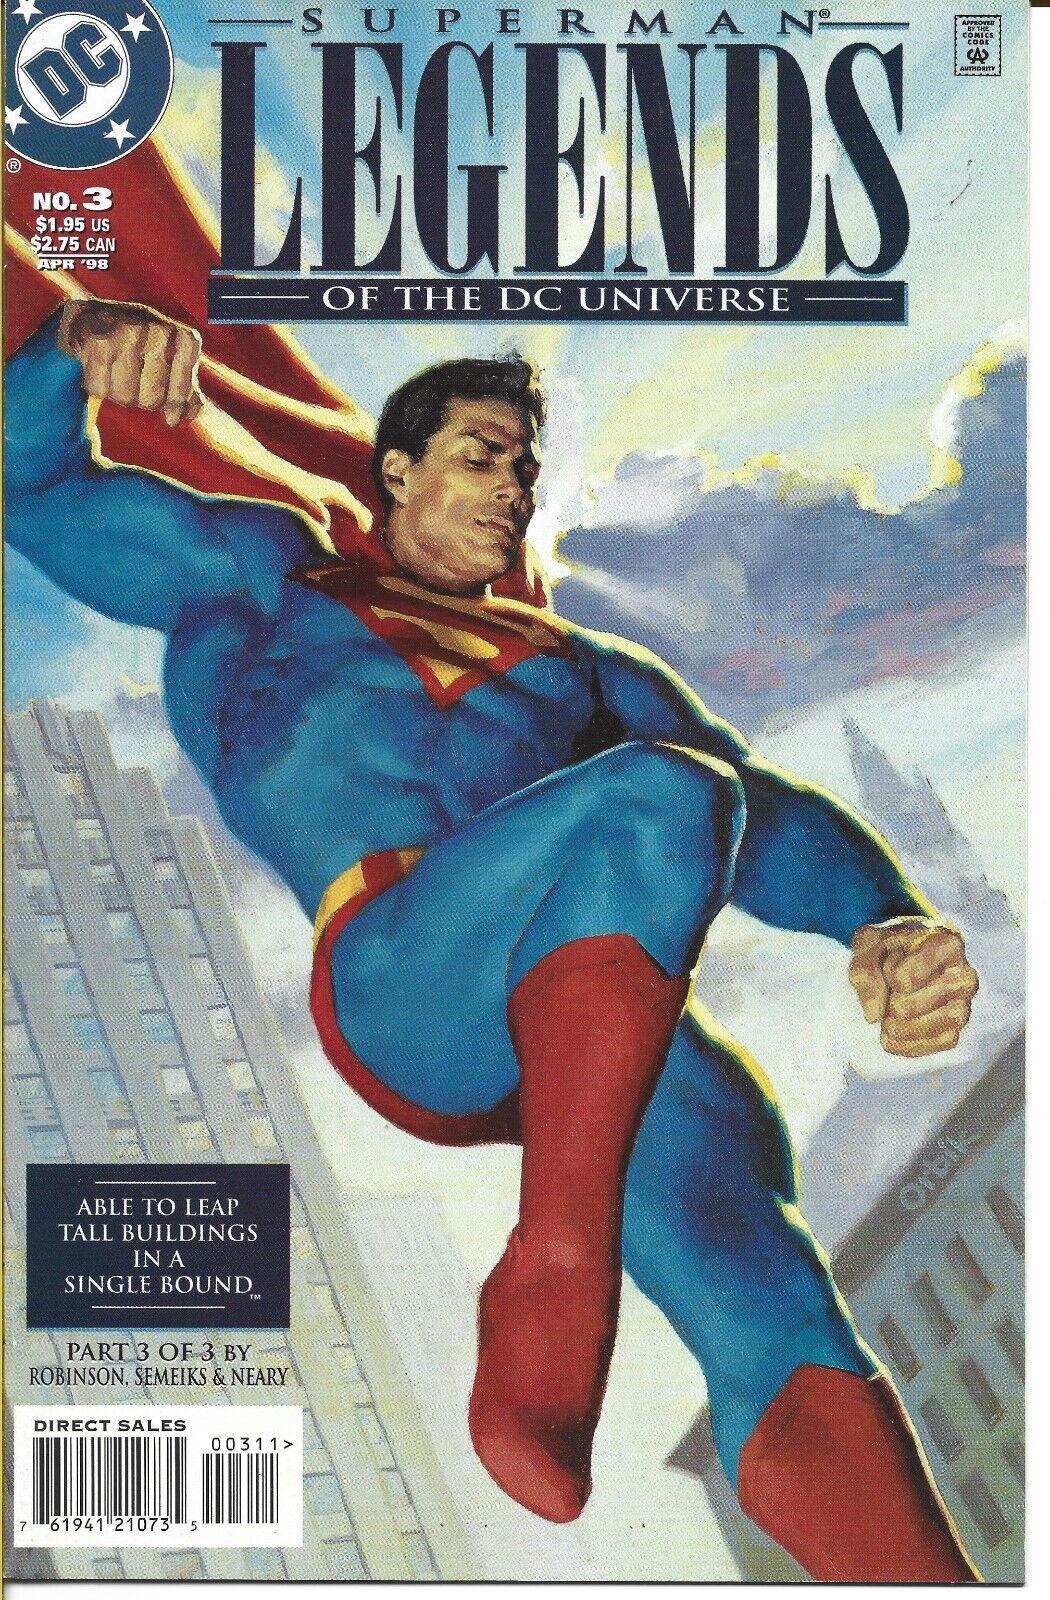 LEGENDS OF THE DC UNIVERSE #3 DC COMICS 1998 BAGGED AND BOARDED